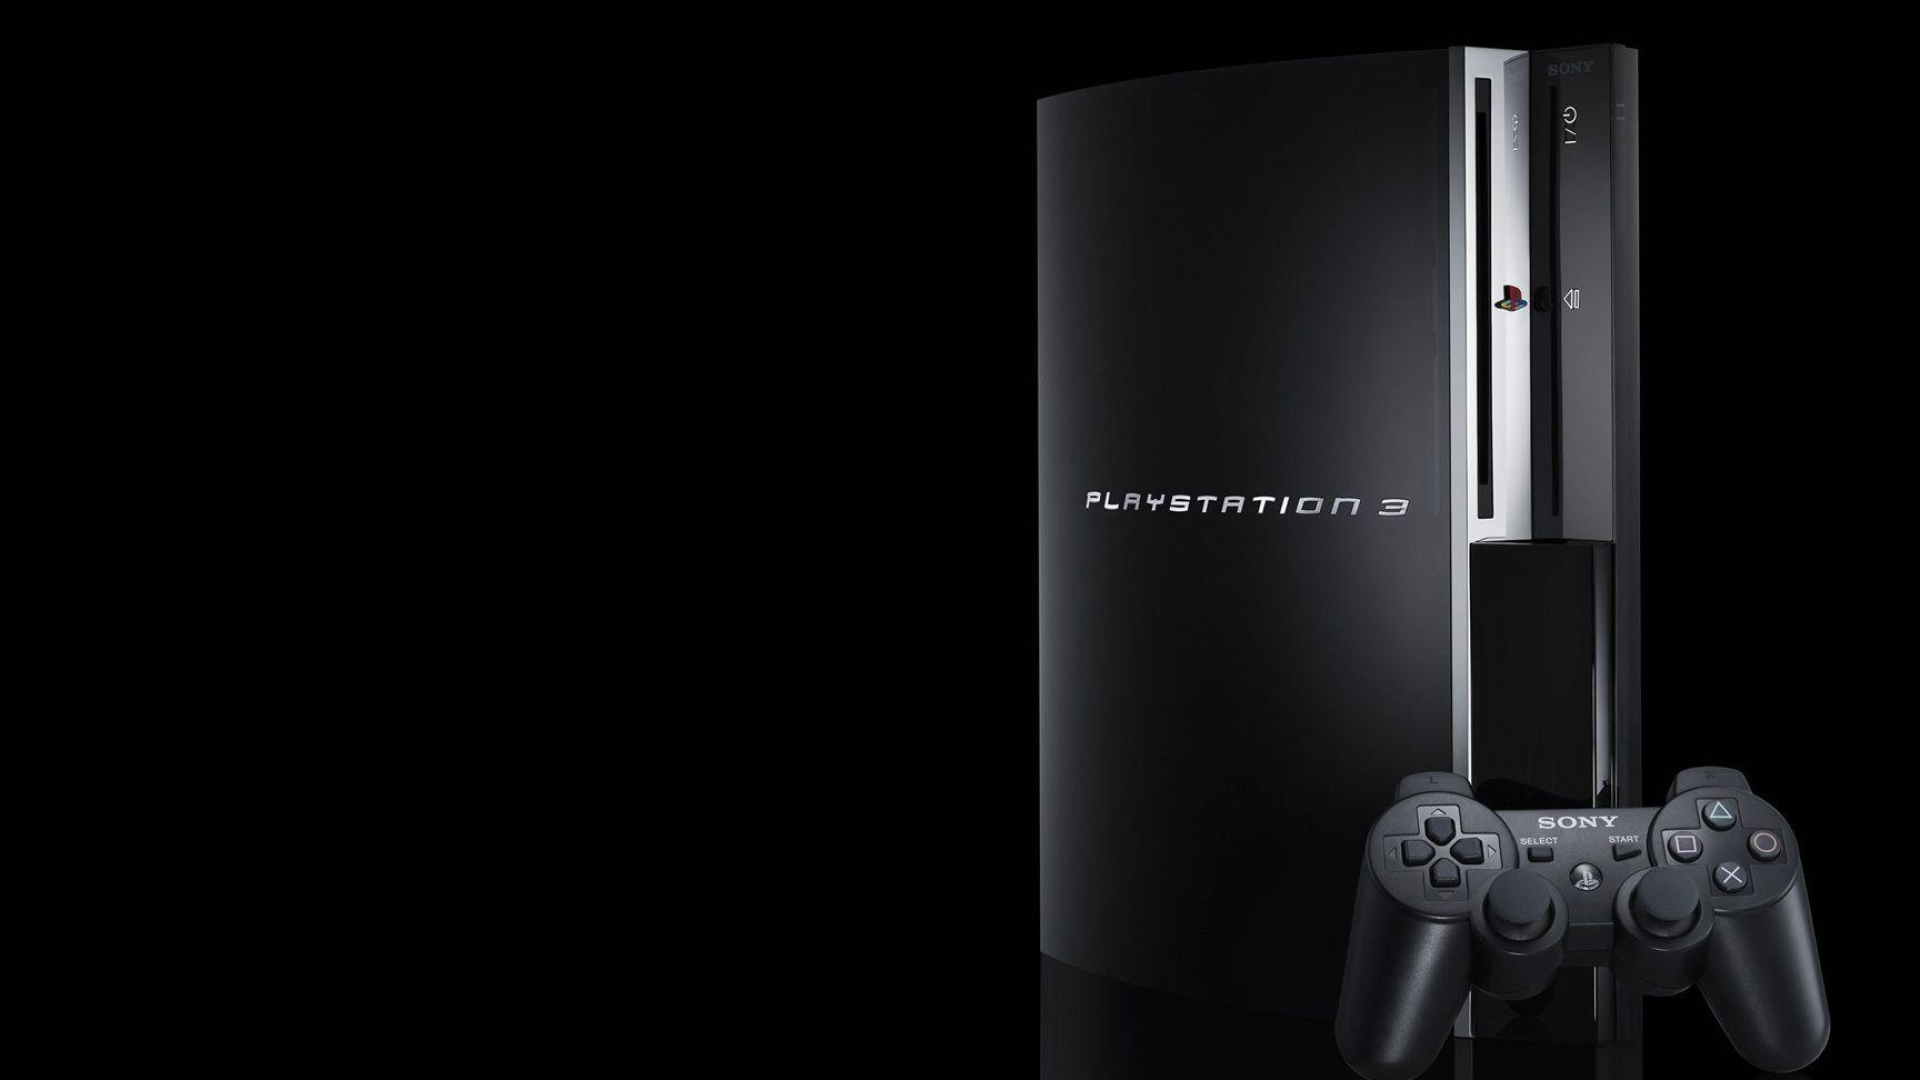 1920x1080 Wallpapers HD Sony Ps3